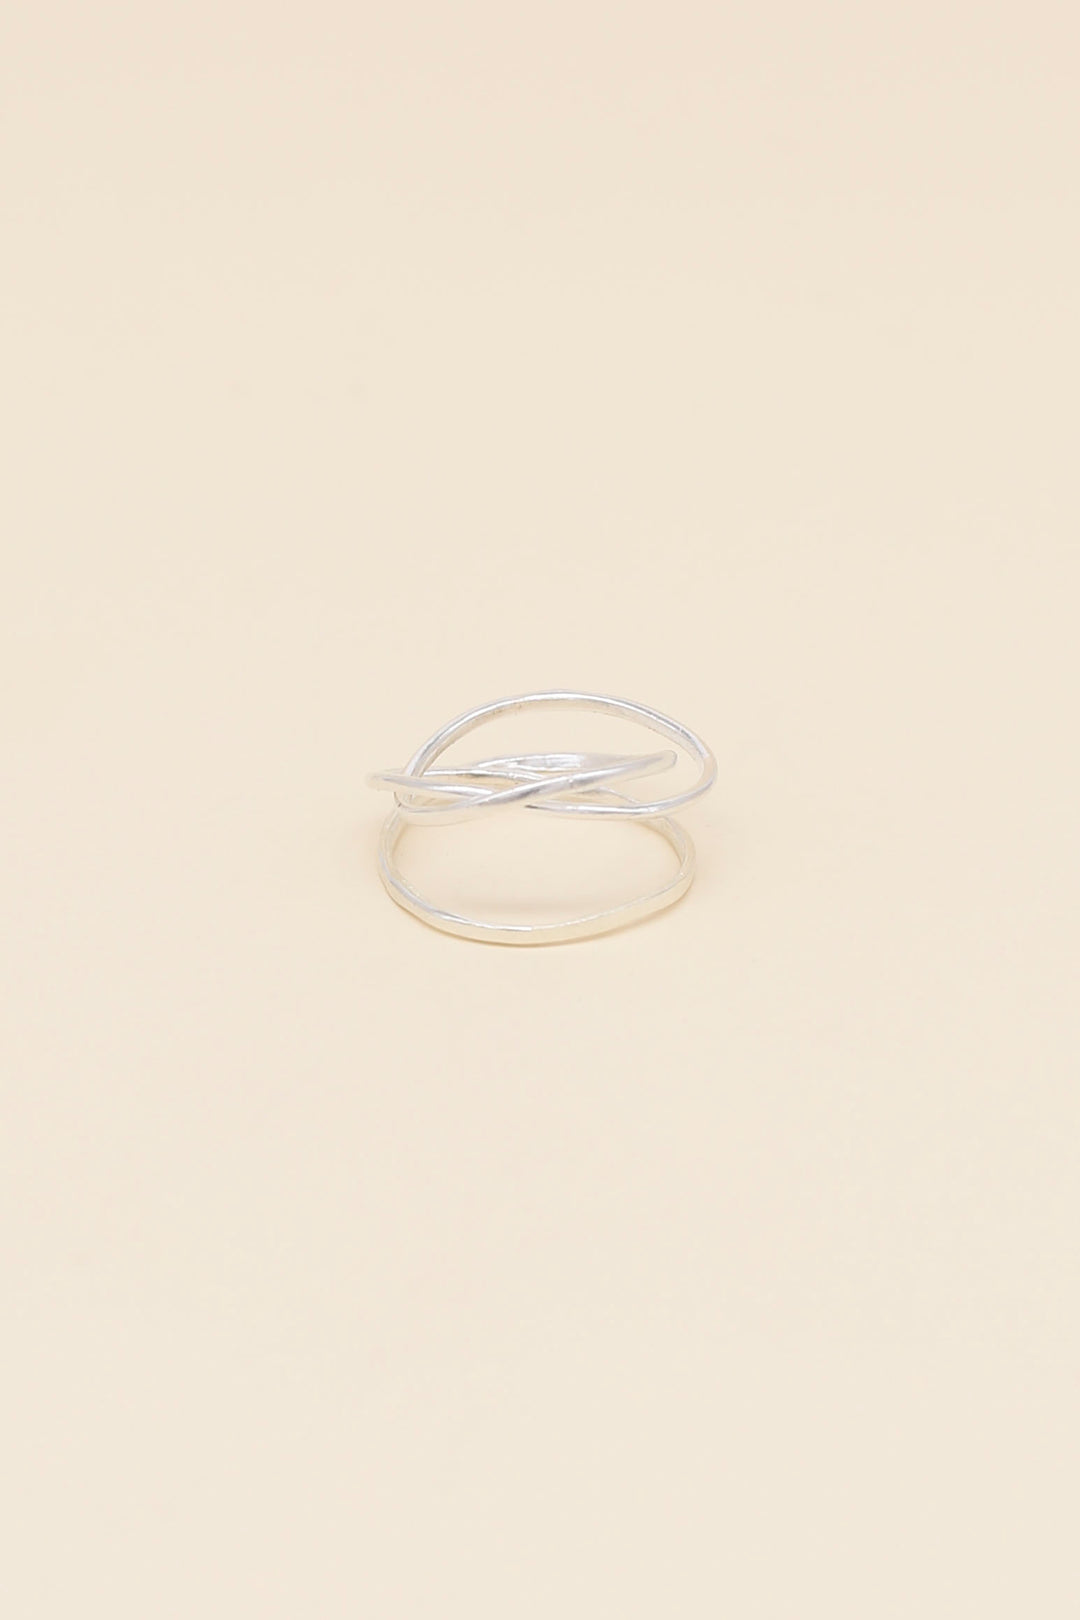 Sprout / SP-R10 / RING